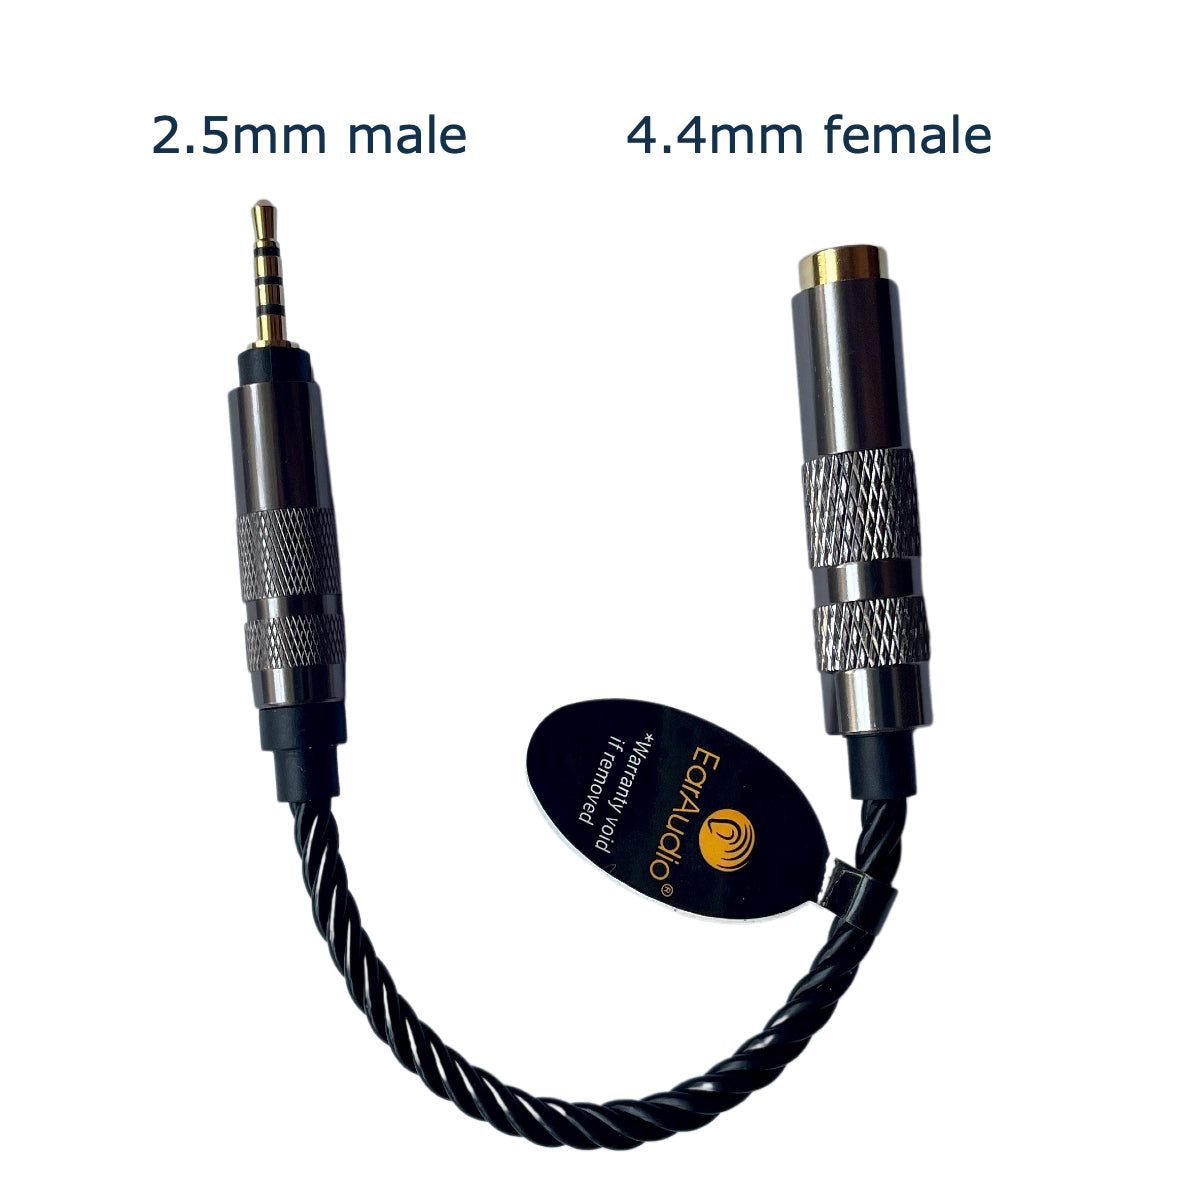 EarAudio 2.5mm male to 4.4mm female Adapter Cable